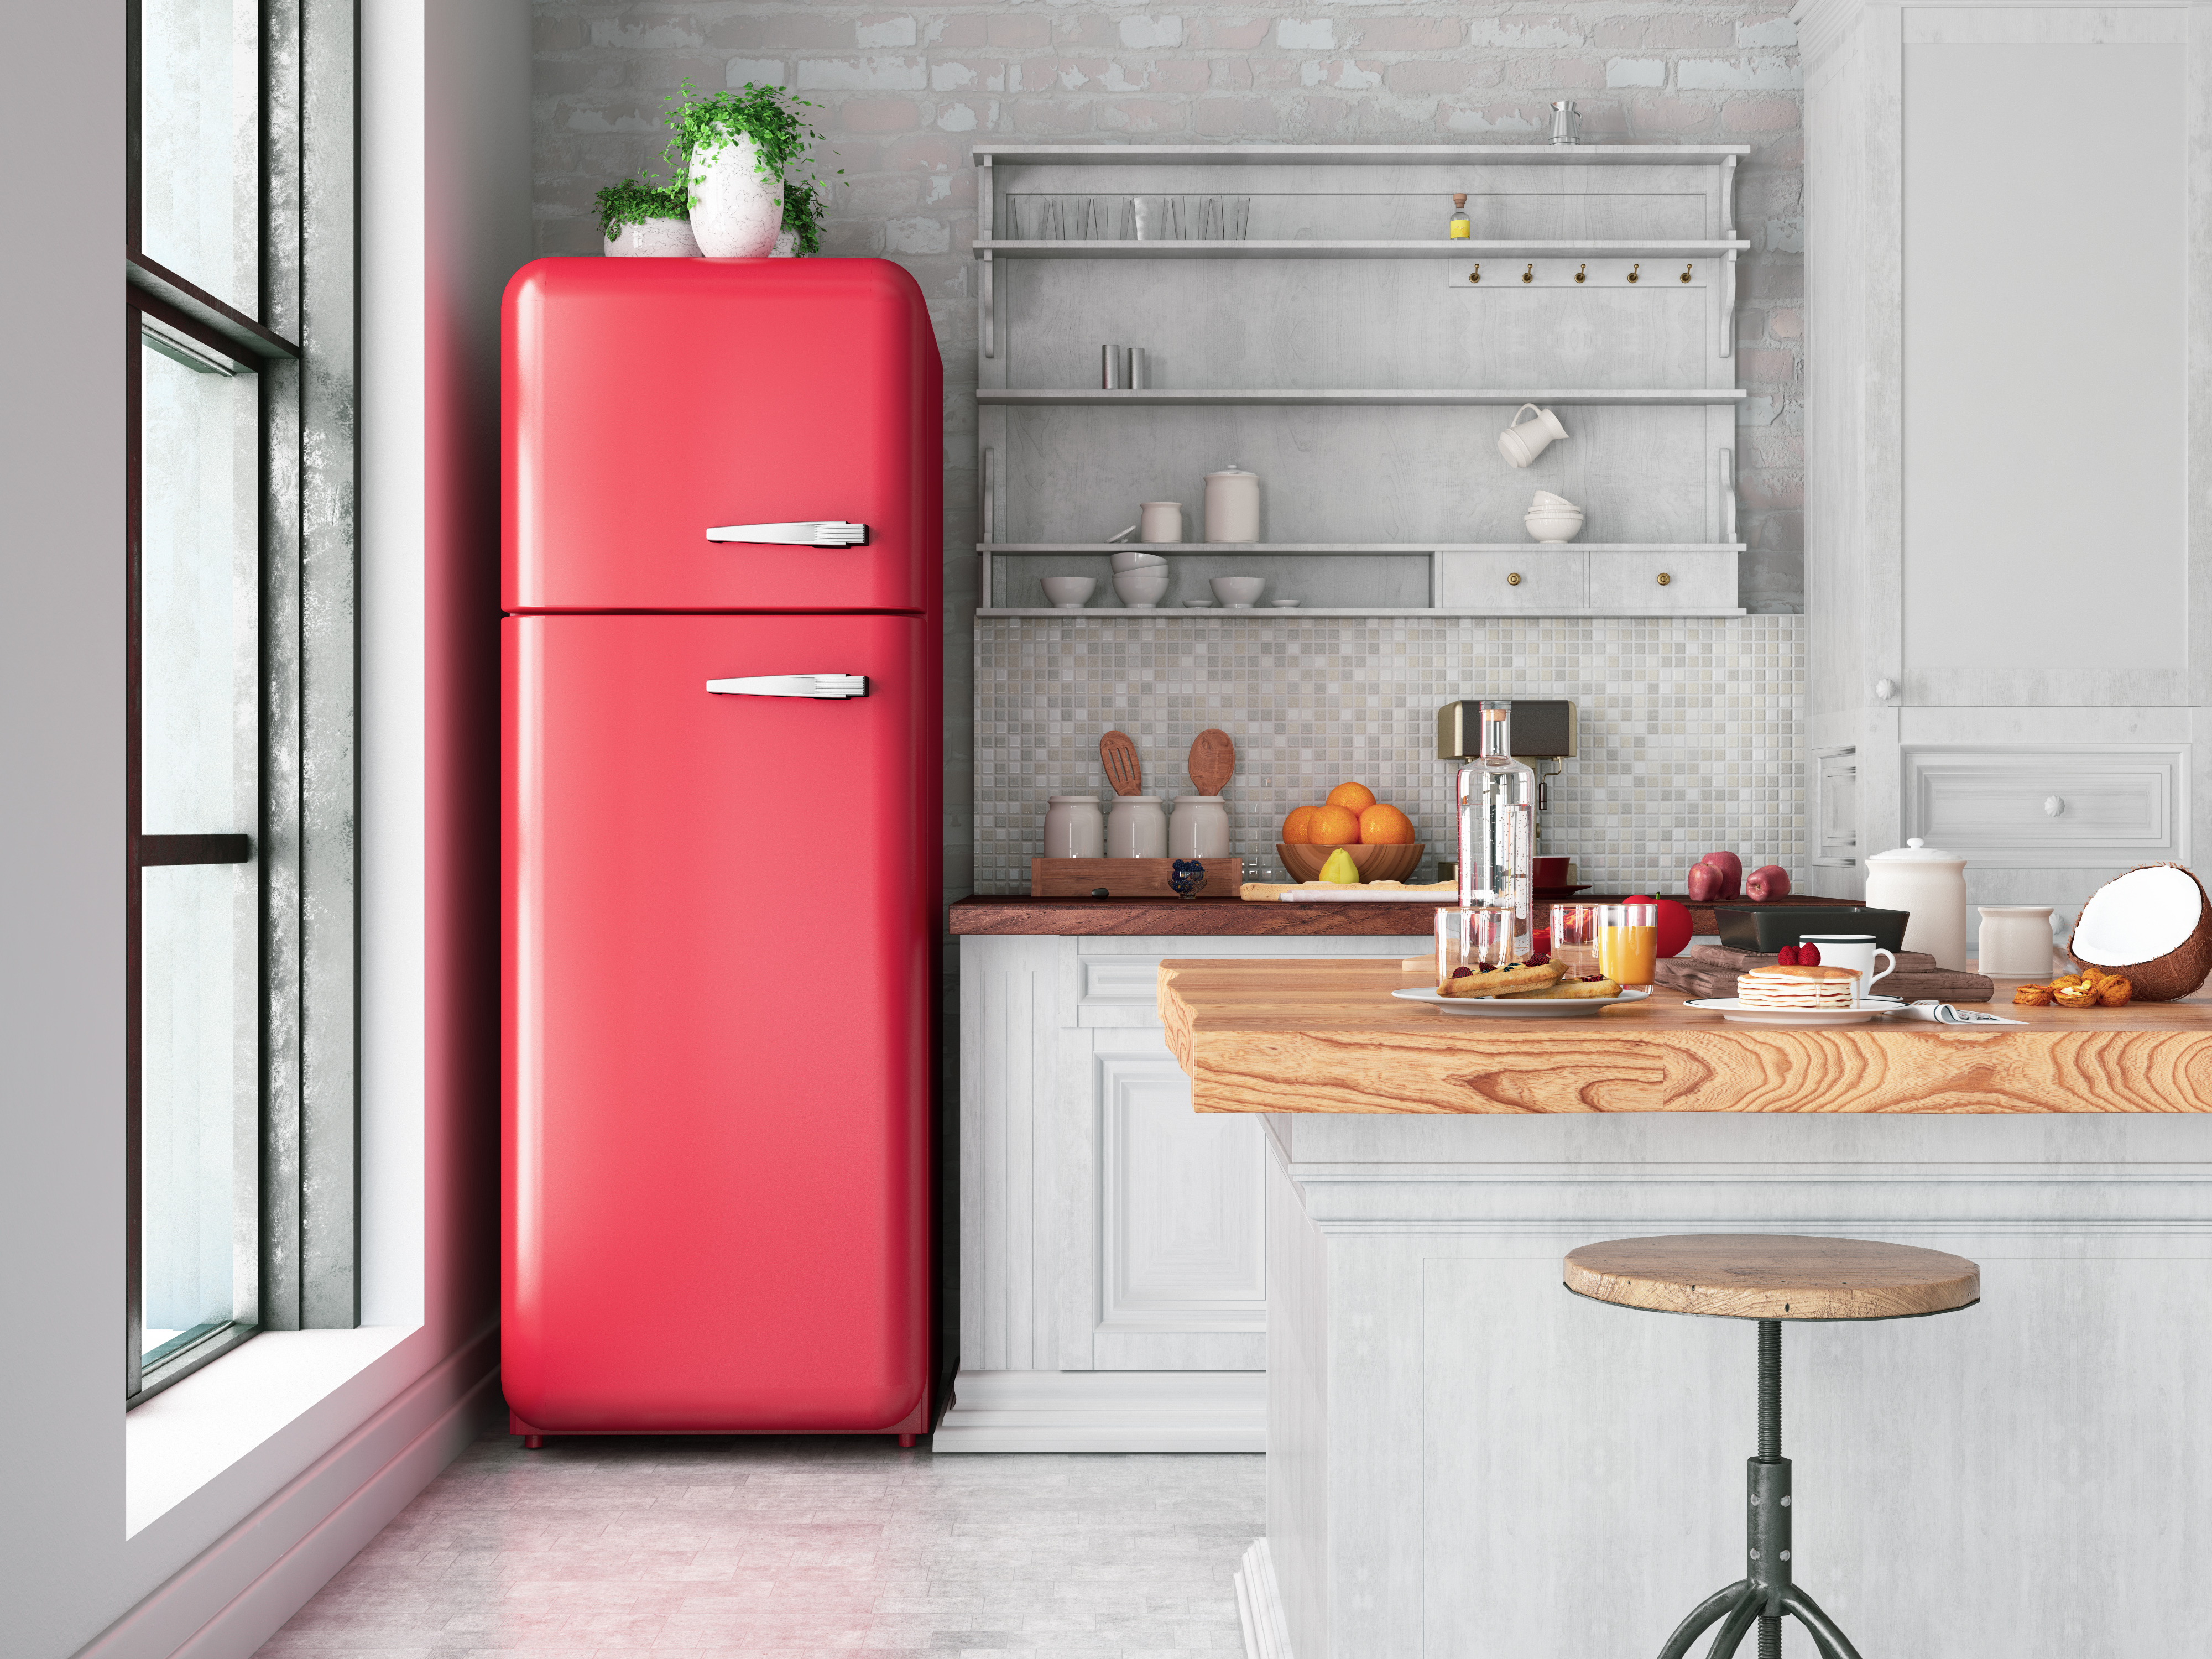 Add a Touch of Vintage Charm with These Retro Mini Fridges